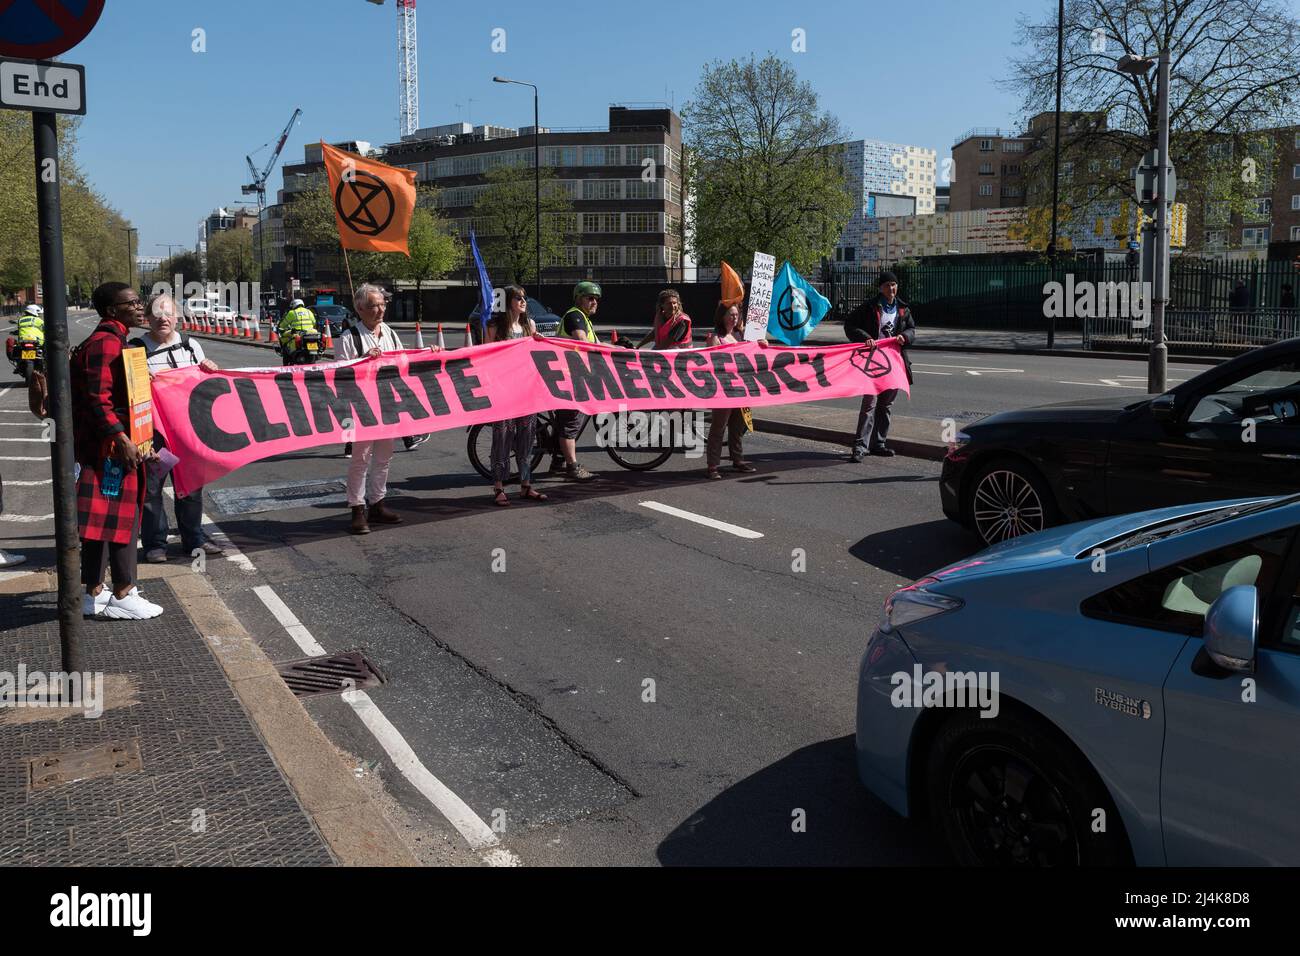 London, UK. 16th April, 2022. Activists from Extinction Rebellion stop the traffic on the Marylebone Flyover on the eight day of protests and civil disobedience actions to demand an immediate stop to all new fossil fuel infrastructure by the British government amid climate crisis and ecological emergency. Credit: Wiktor Szymanowicz/Alamy Live News Stock Photo